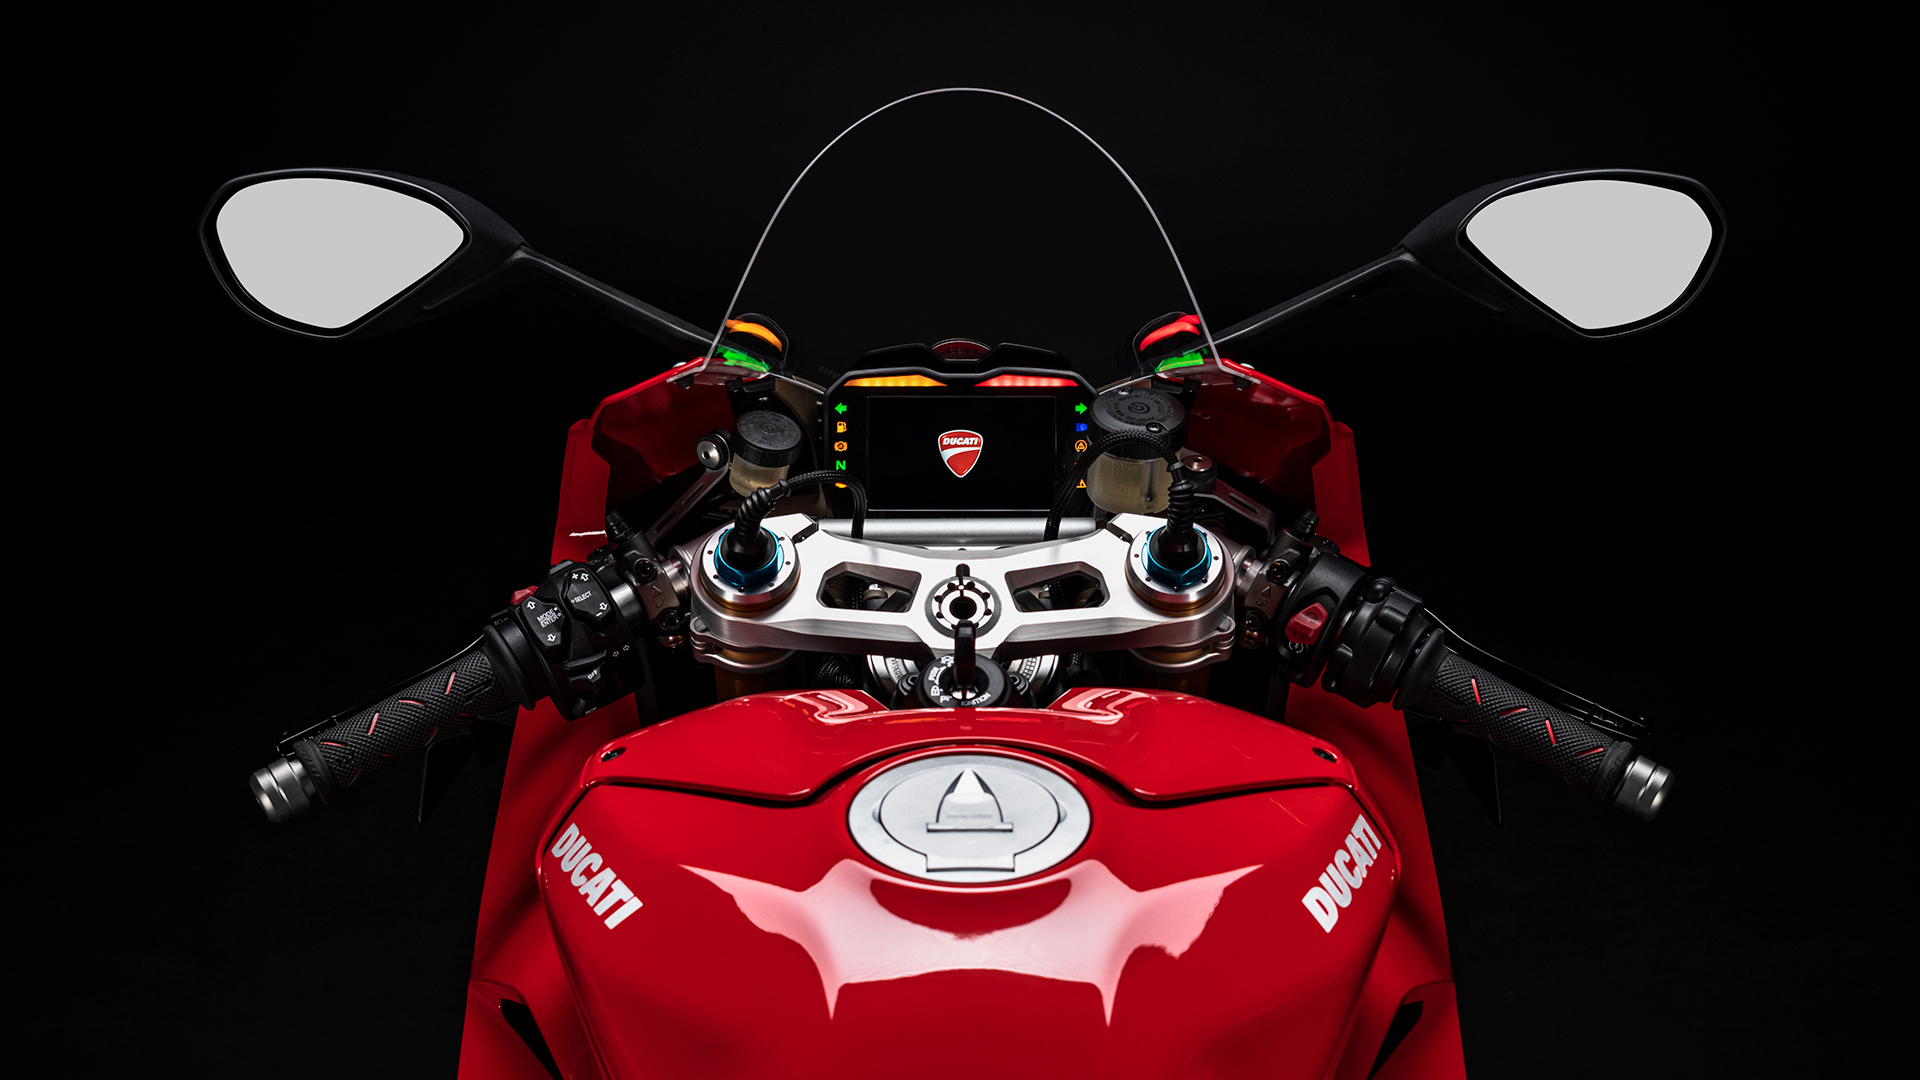 Panigale-V4-S-MY20-Red-05-Gallery-1920x1080